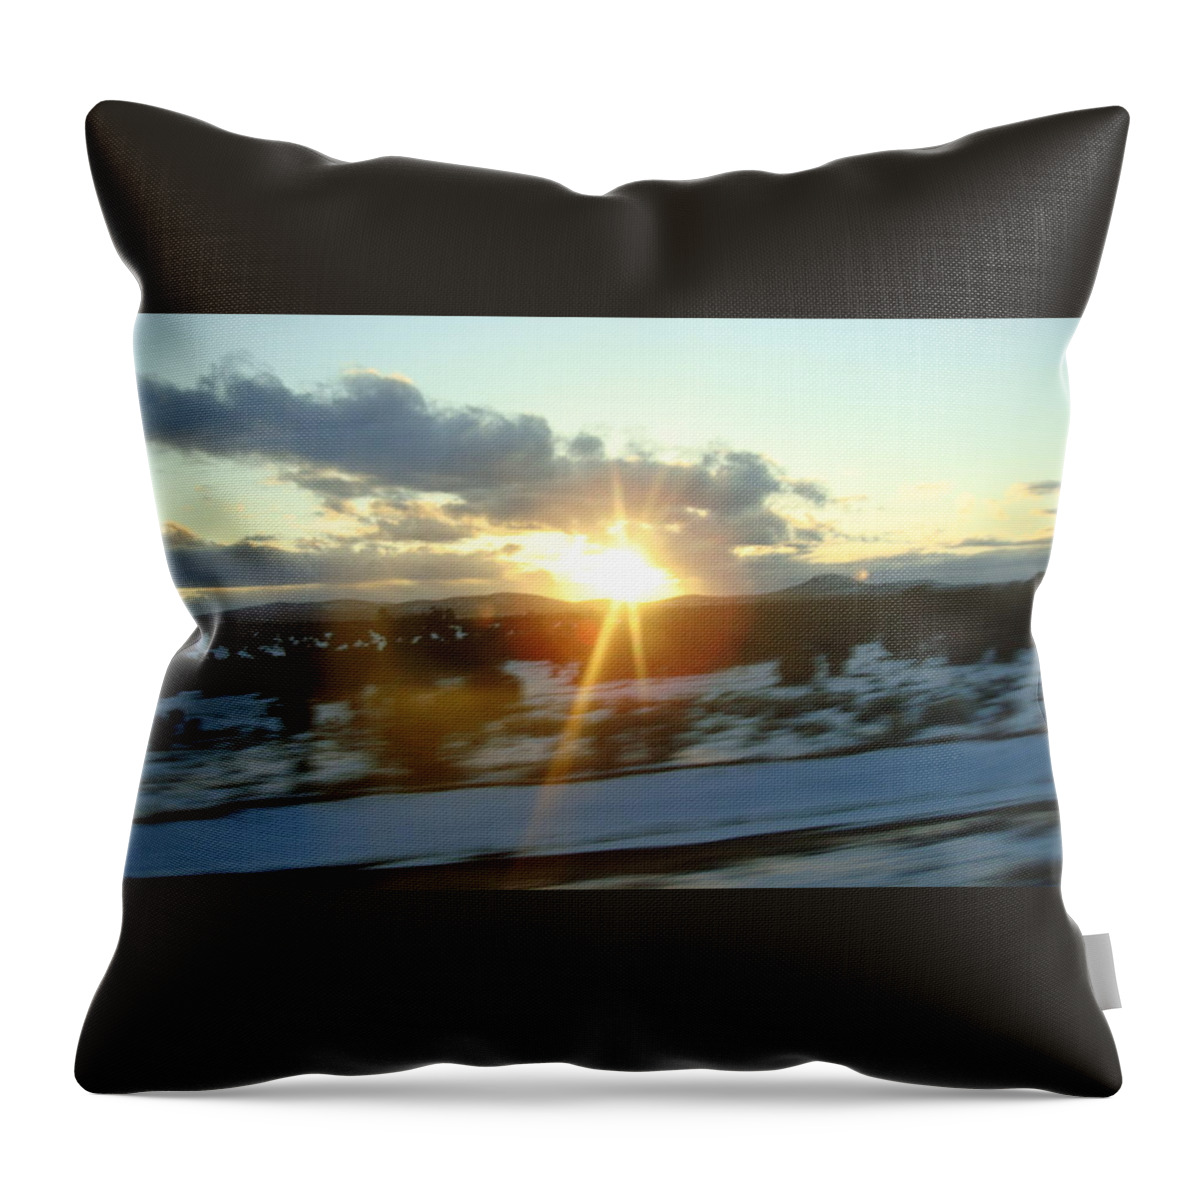  Throw Pillow featuring the photograph Sunfall 1 by Trevor A Smith